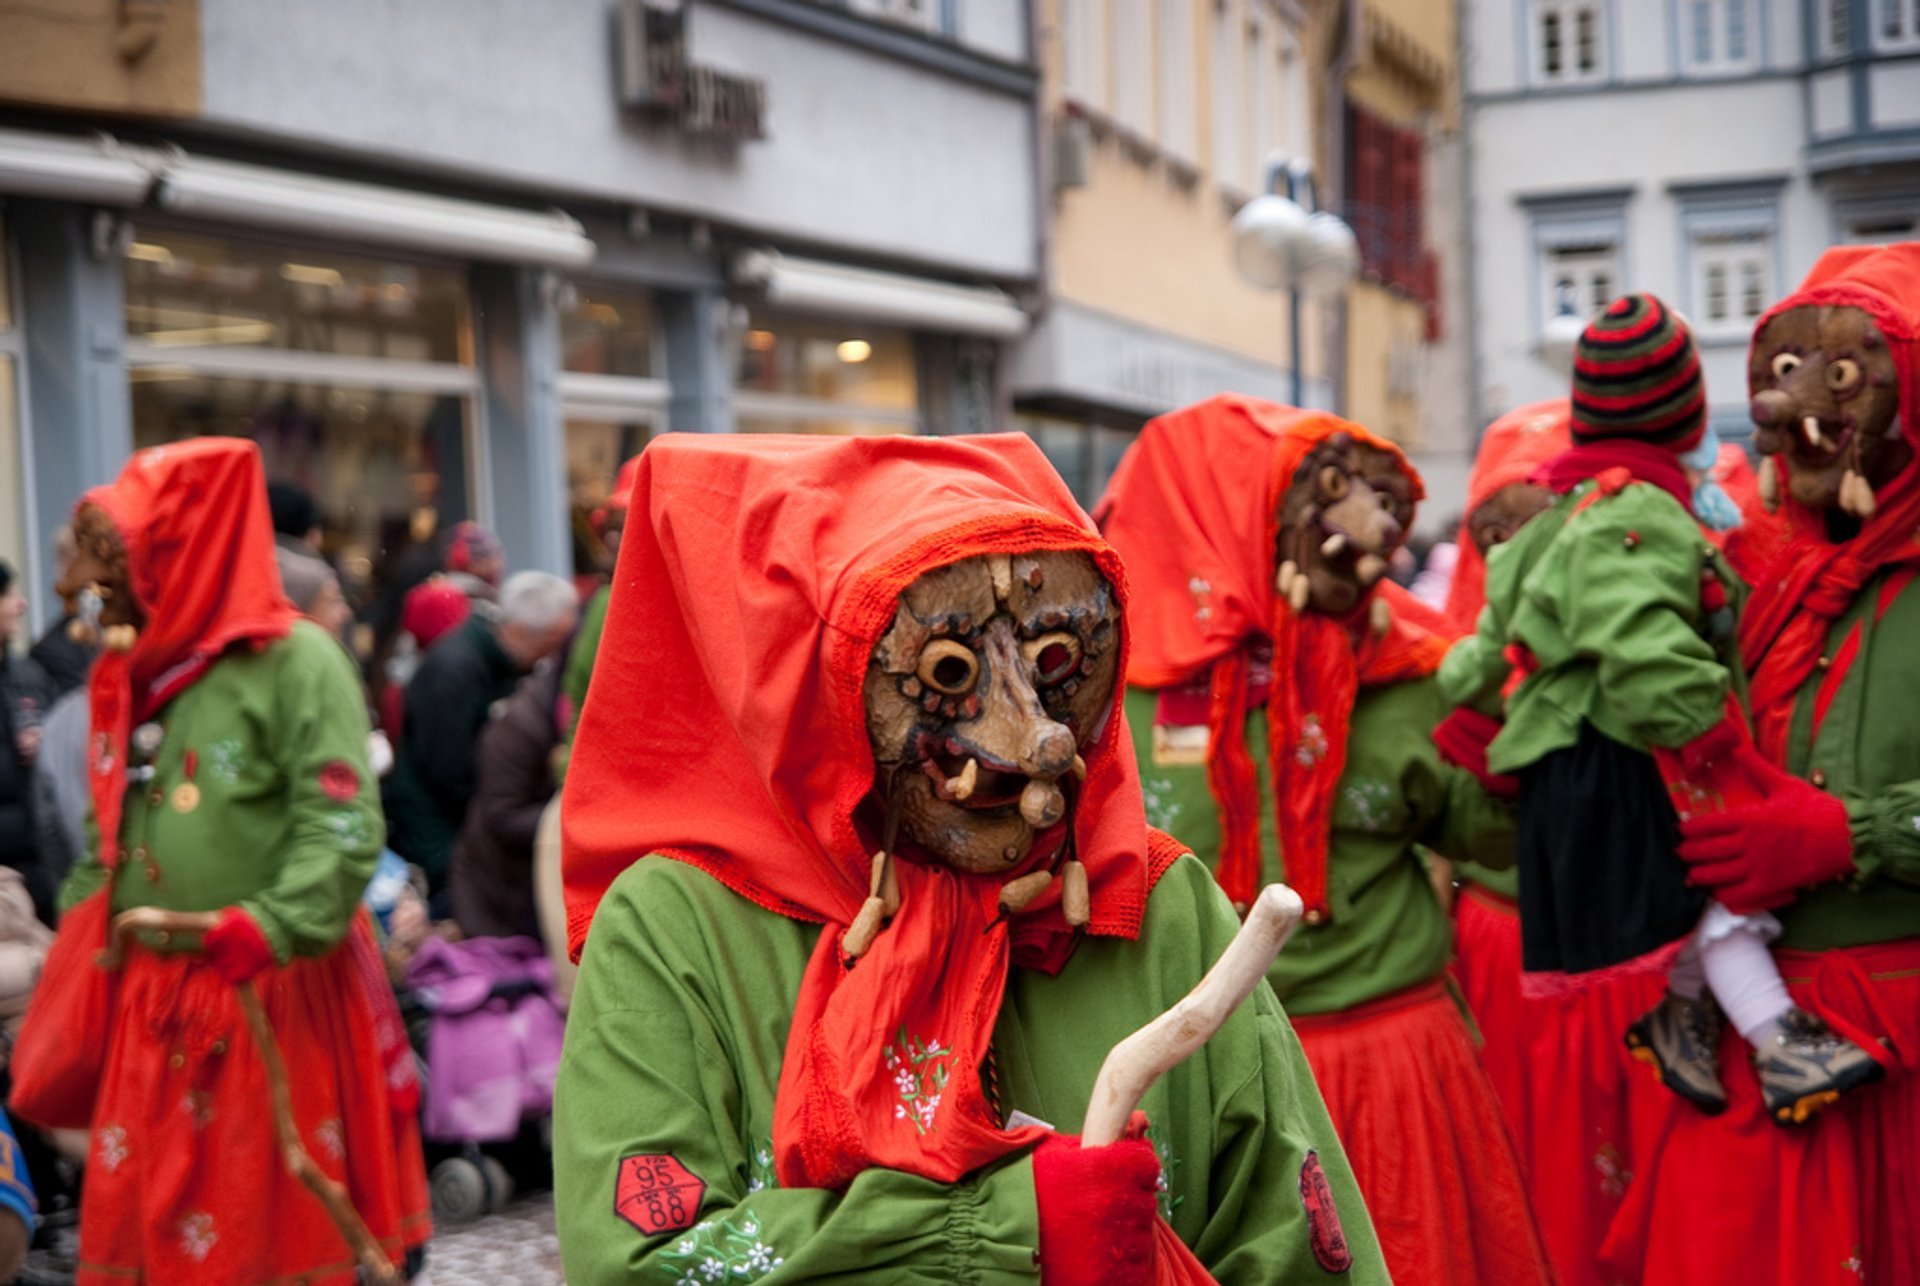 Fasching, Karneval and Fastnacht